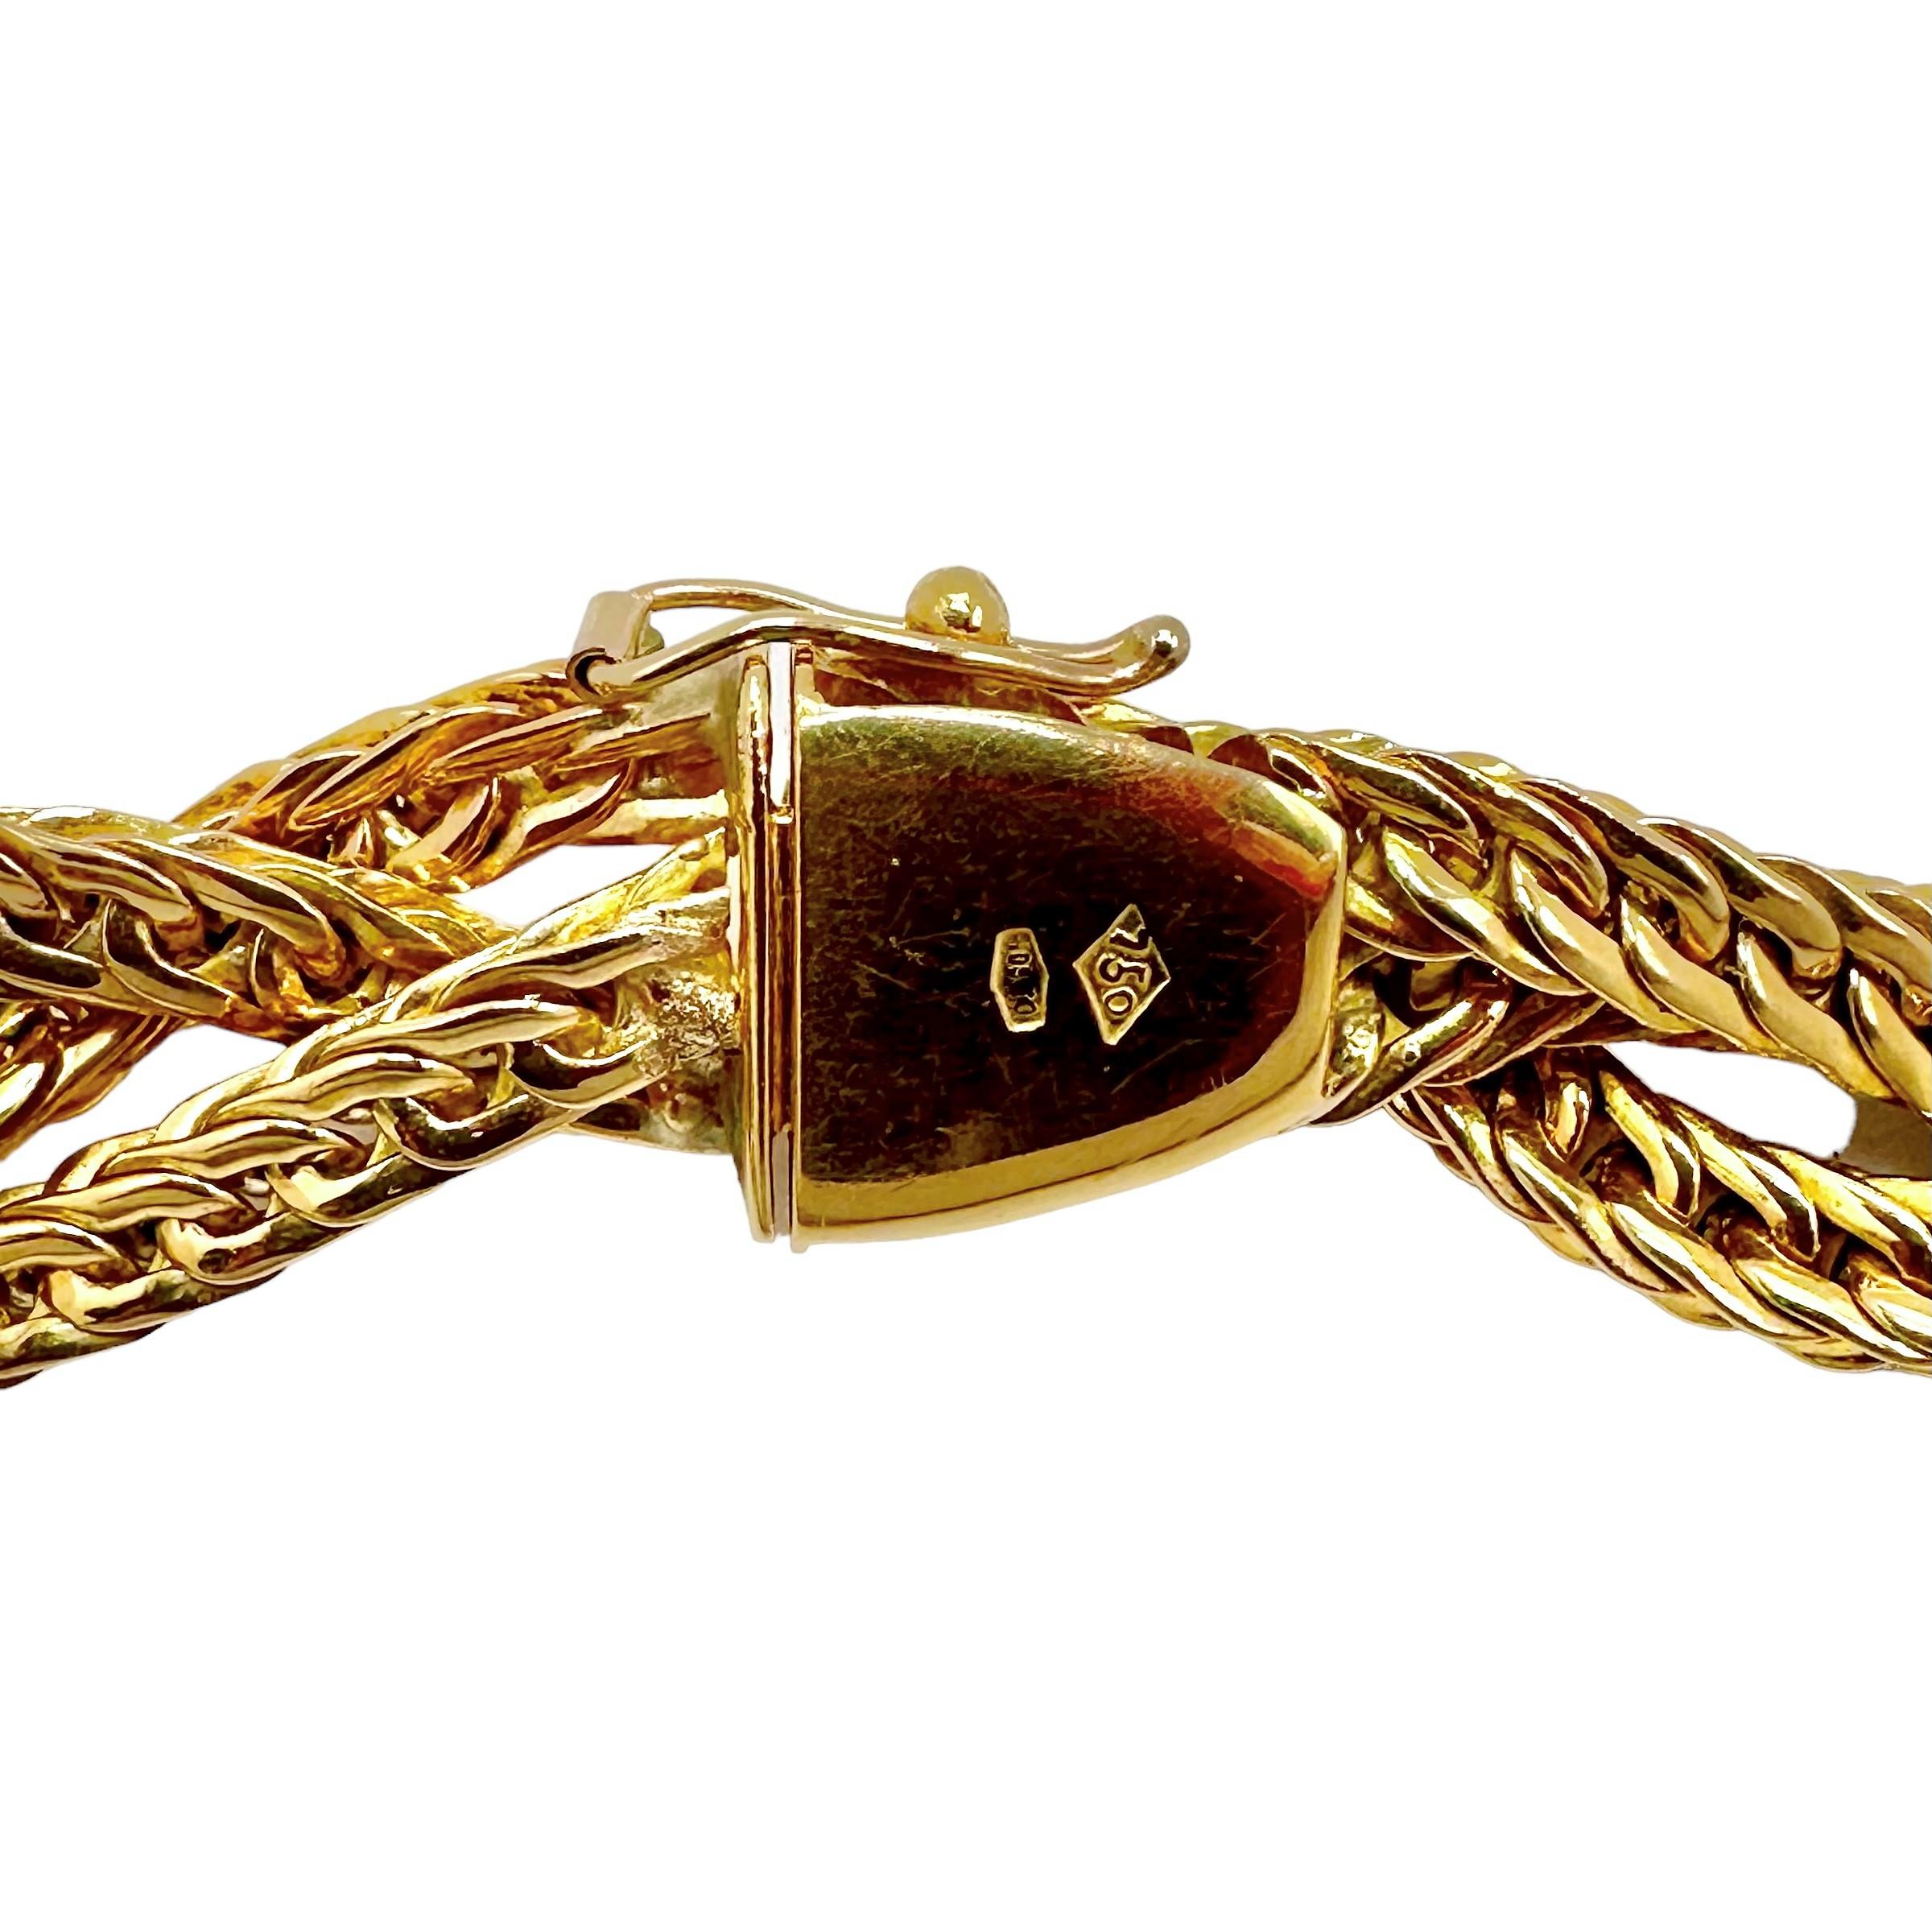 Elegant Italian 18k Gold 3 Strand Braided Necklace In Good Condition For Sale In Palm Beach, FL